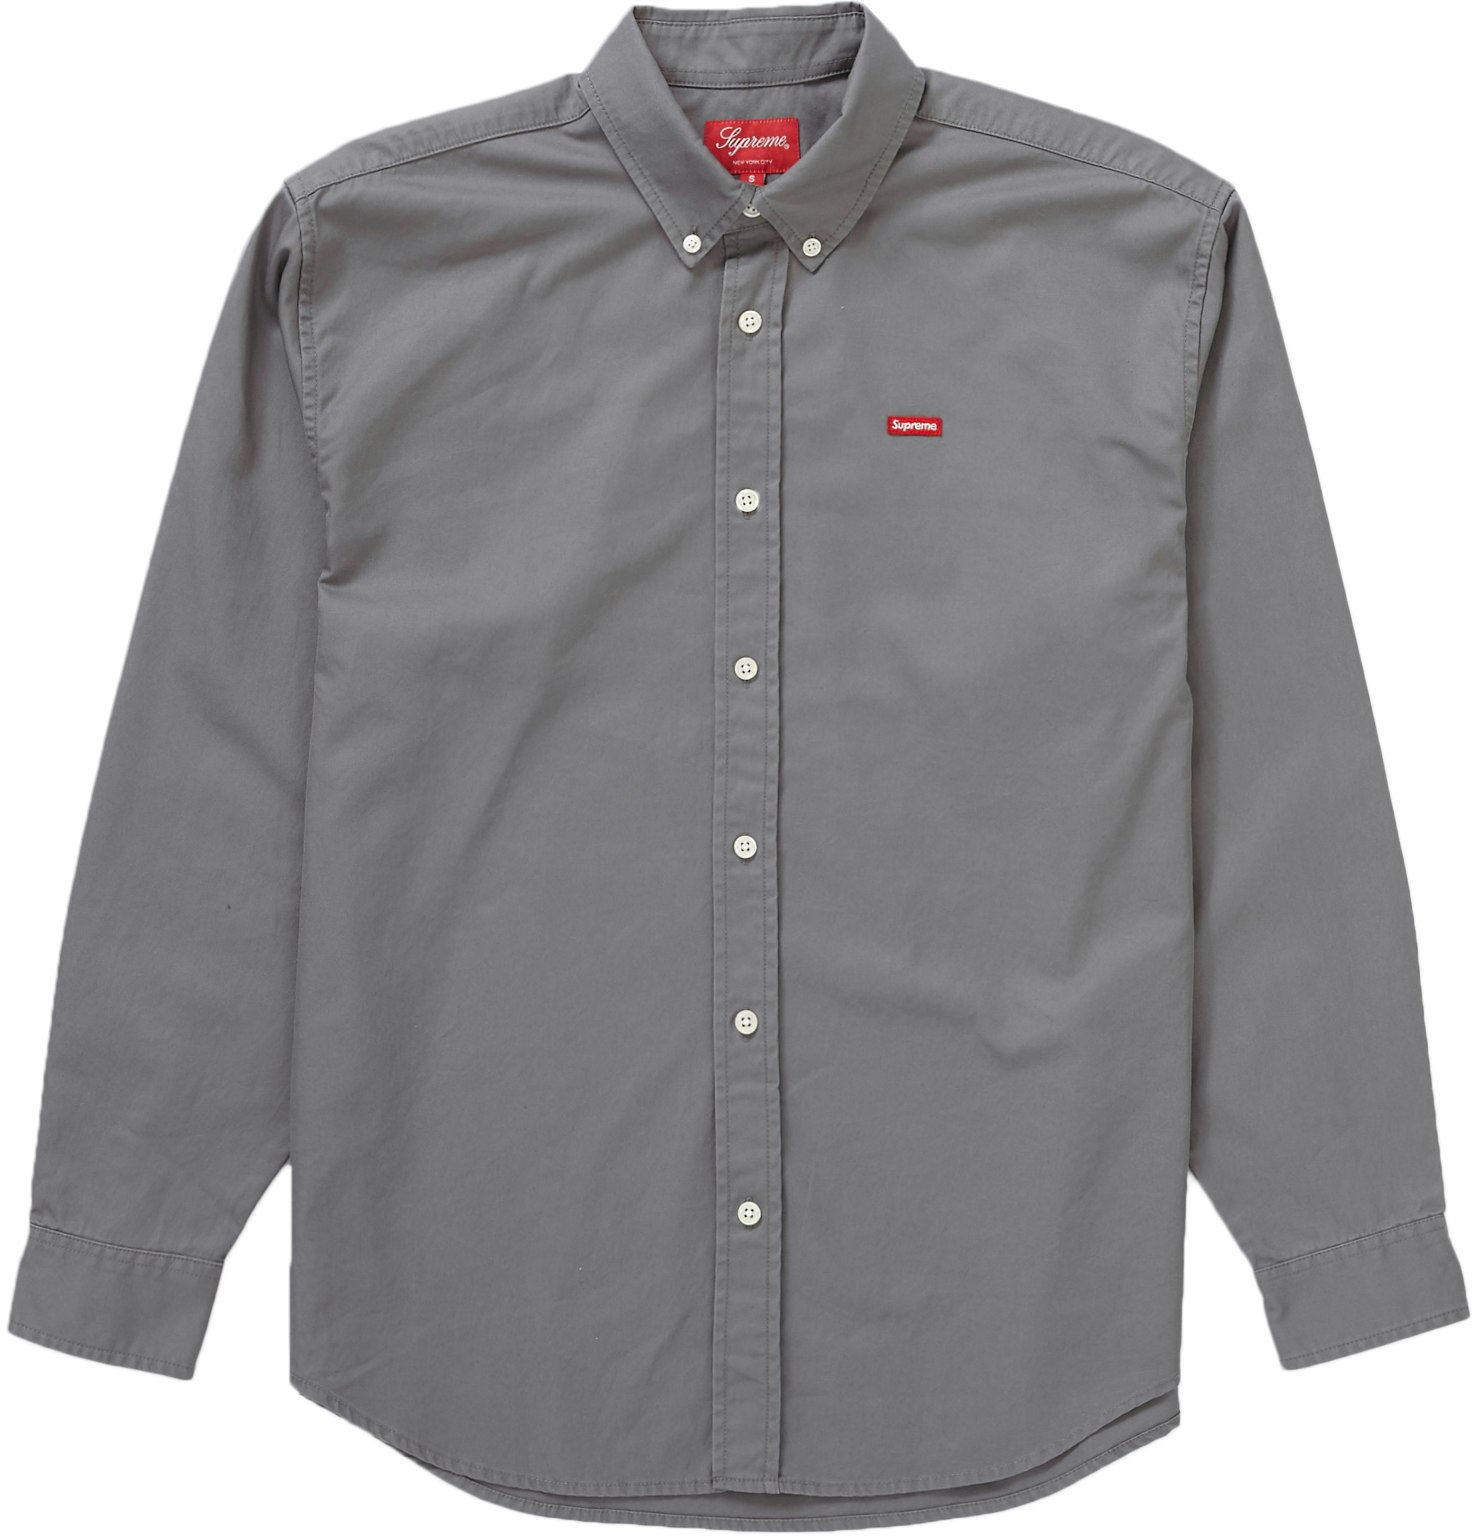 S/S19 Supreme Oxford Button Up Shirt